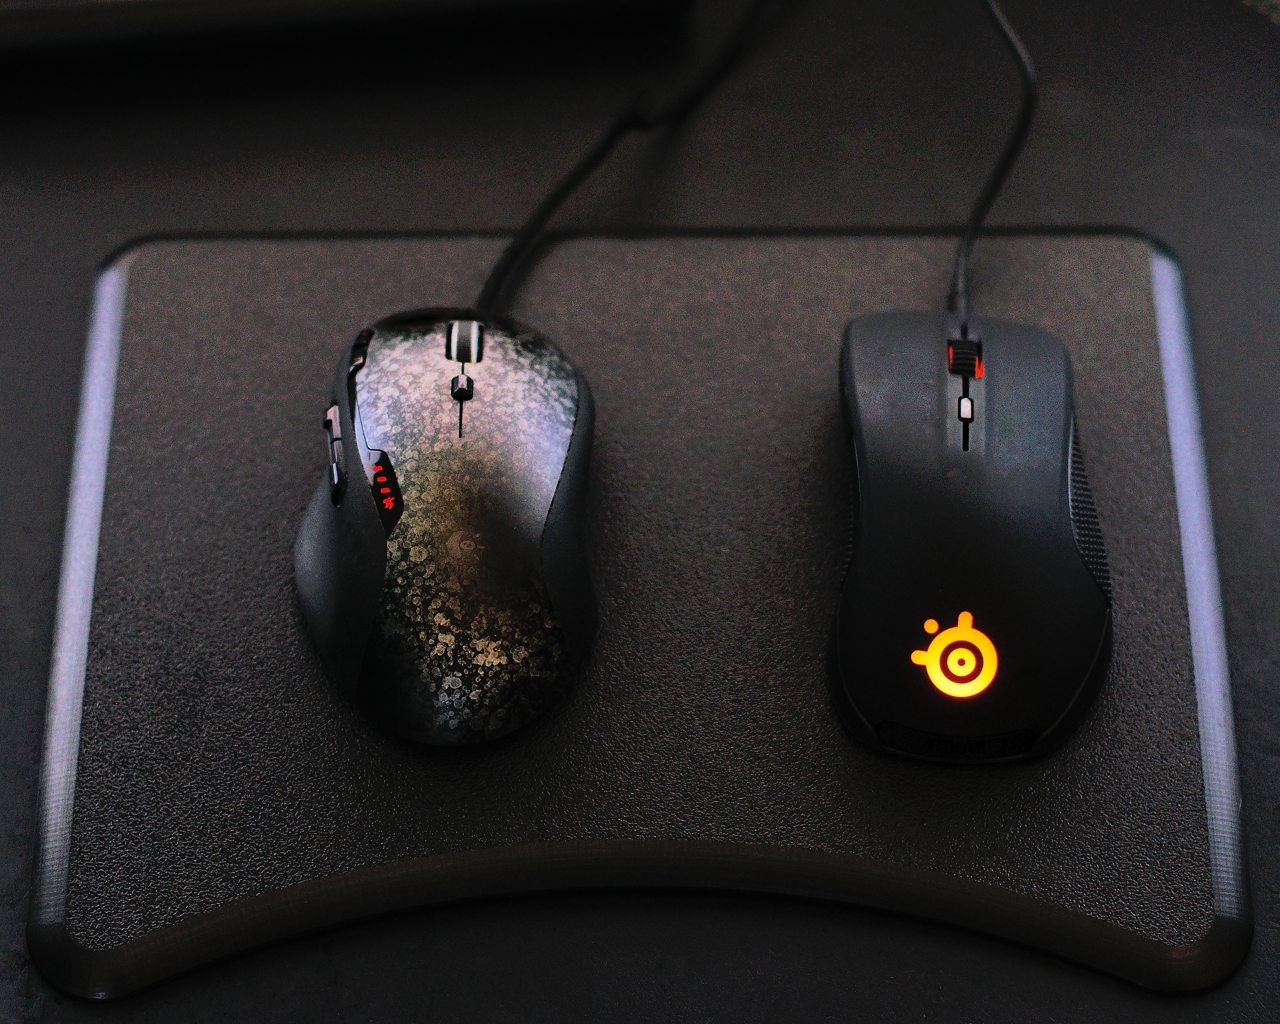 Recommend a replacement for my Logitech G500 mouse? | [H]ard|Forum